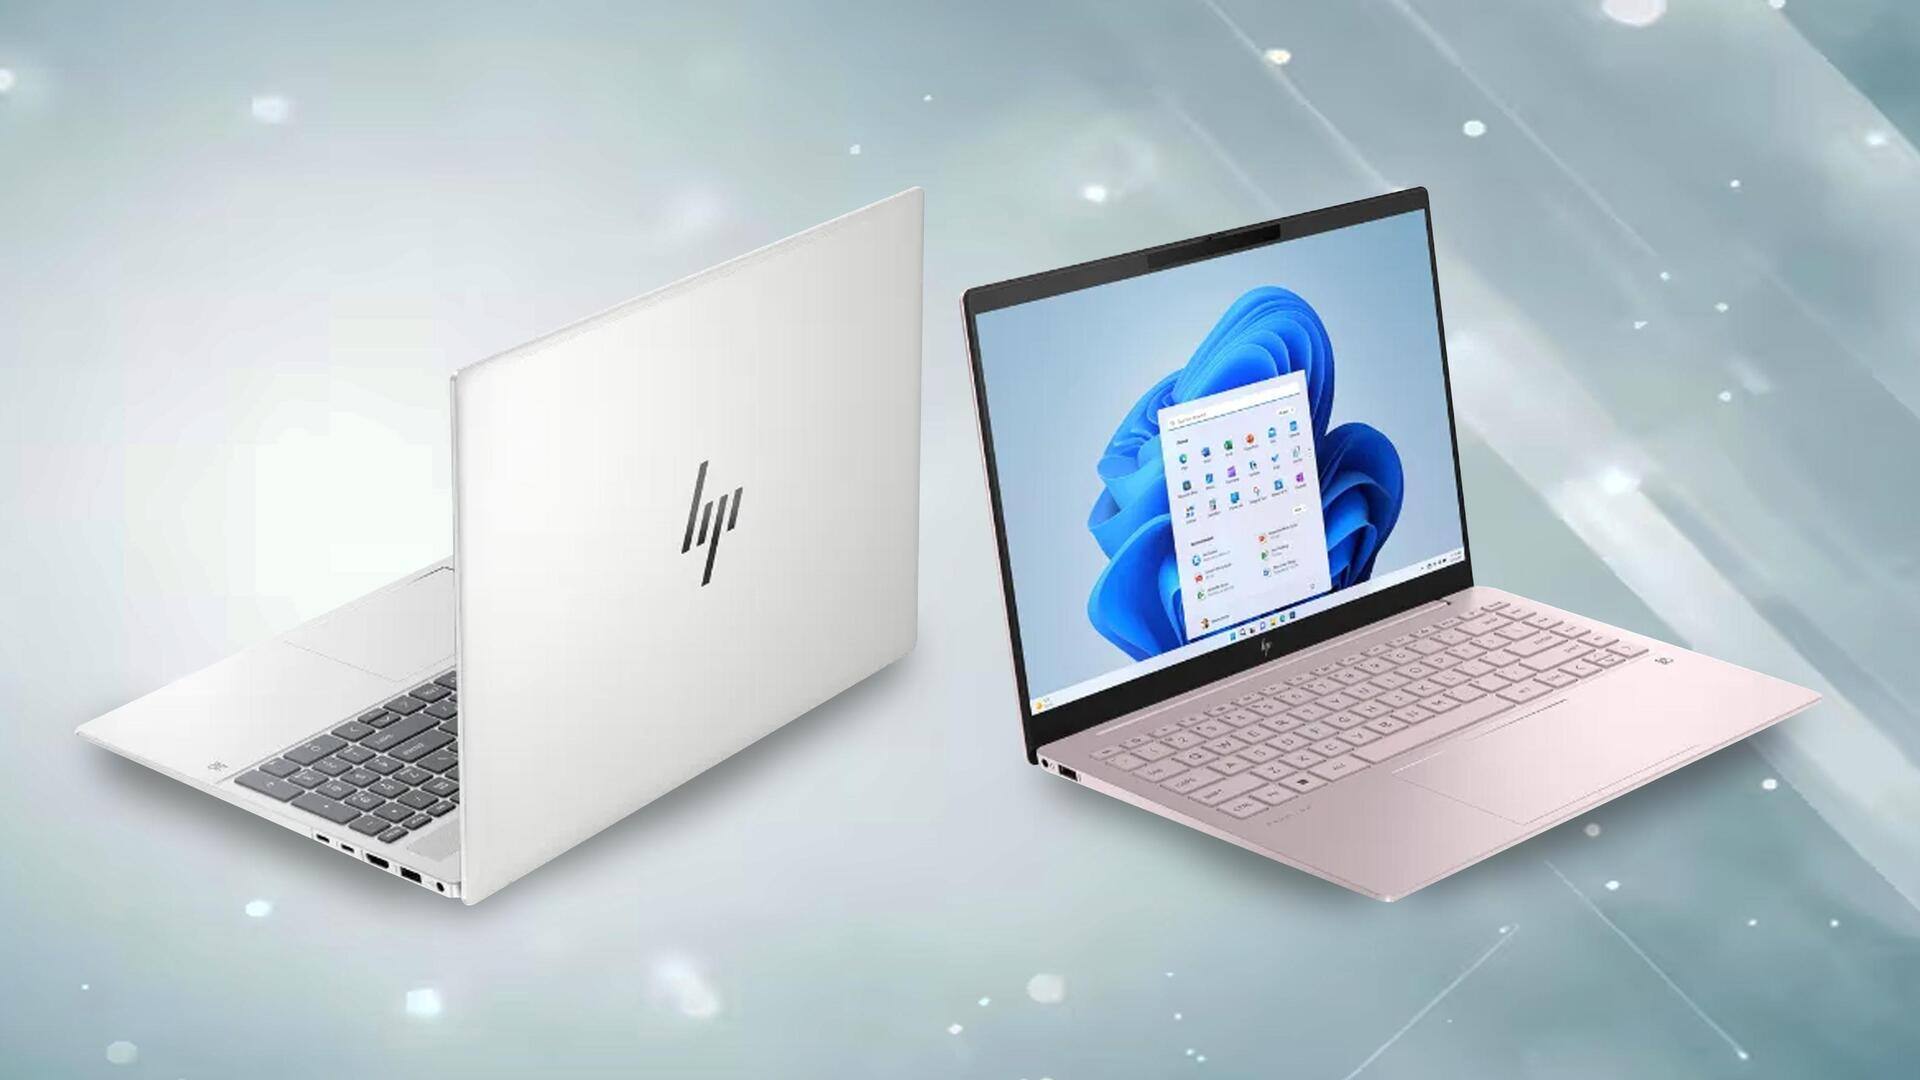 HP launches new Pavilion Plus laptops starting at Rs. 92,000